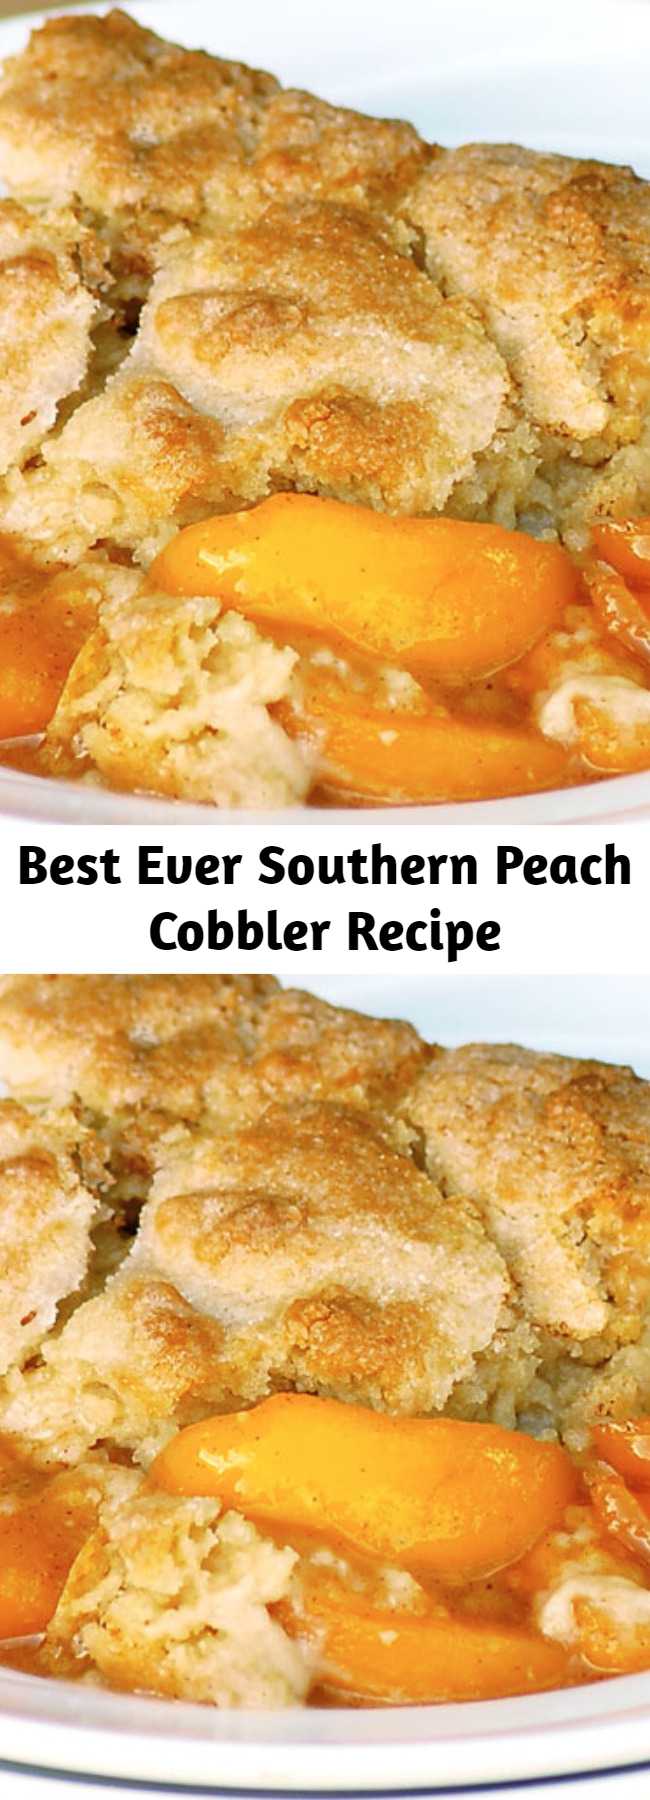 Best Ever Southern Peach Cobbler Recipe - Best Ever Southern Peach Cobbler is the simple recipe of your dreams. Fresh sweet peaches baked in a spiced sugar mixture and topped with the most amazing cobbler topping. Sprinkled with sugar for a caramelized topping it is heaven on a plate. #peachcobbler #summer